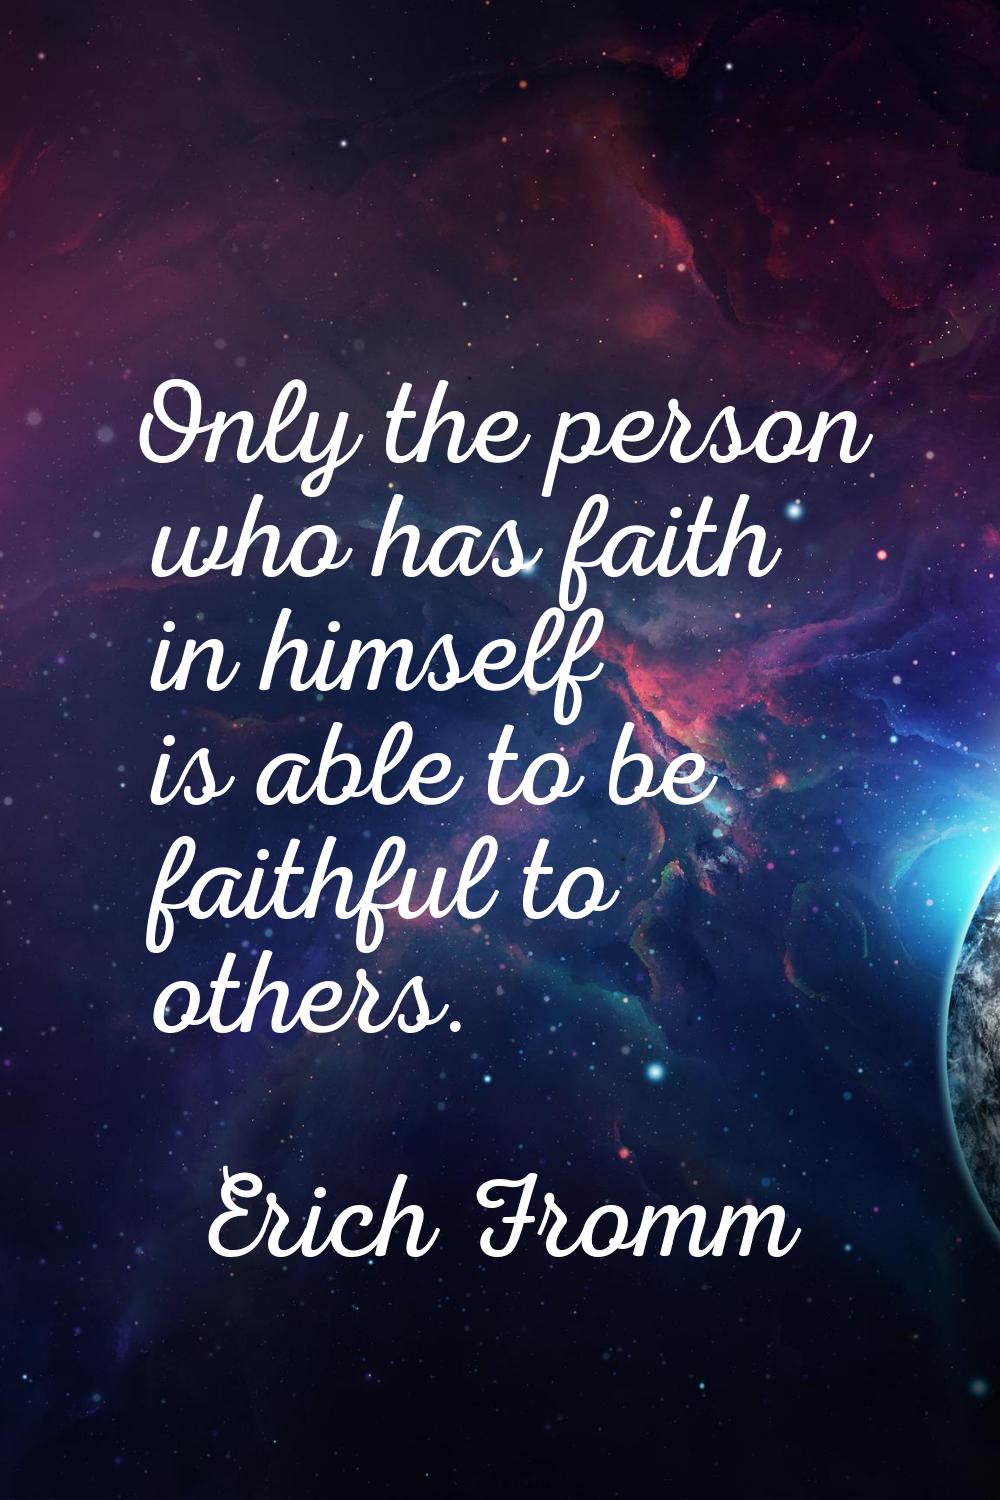 Only the person who has faith in himself is able to be faithful to others.